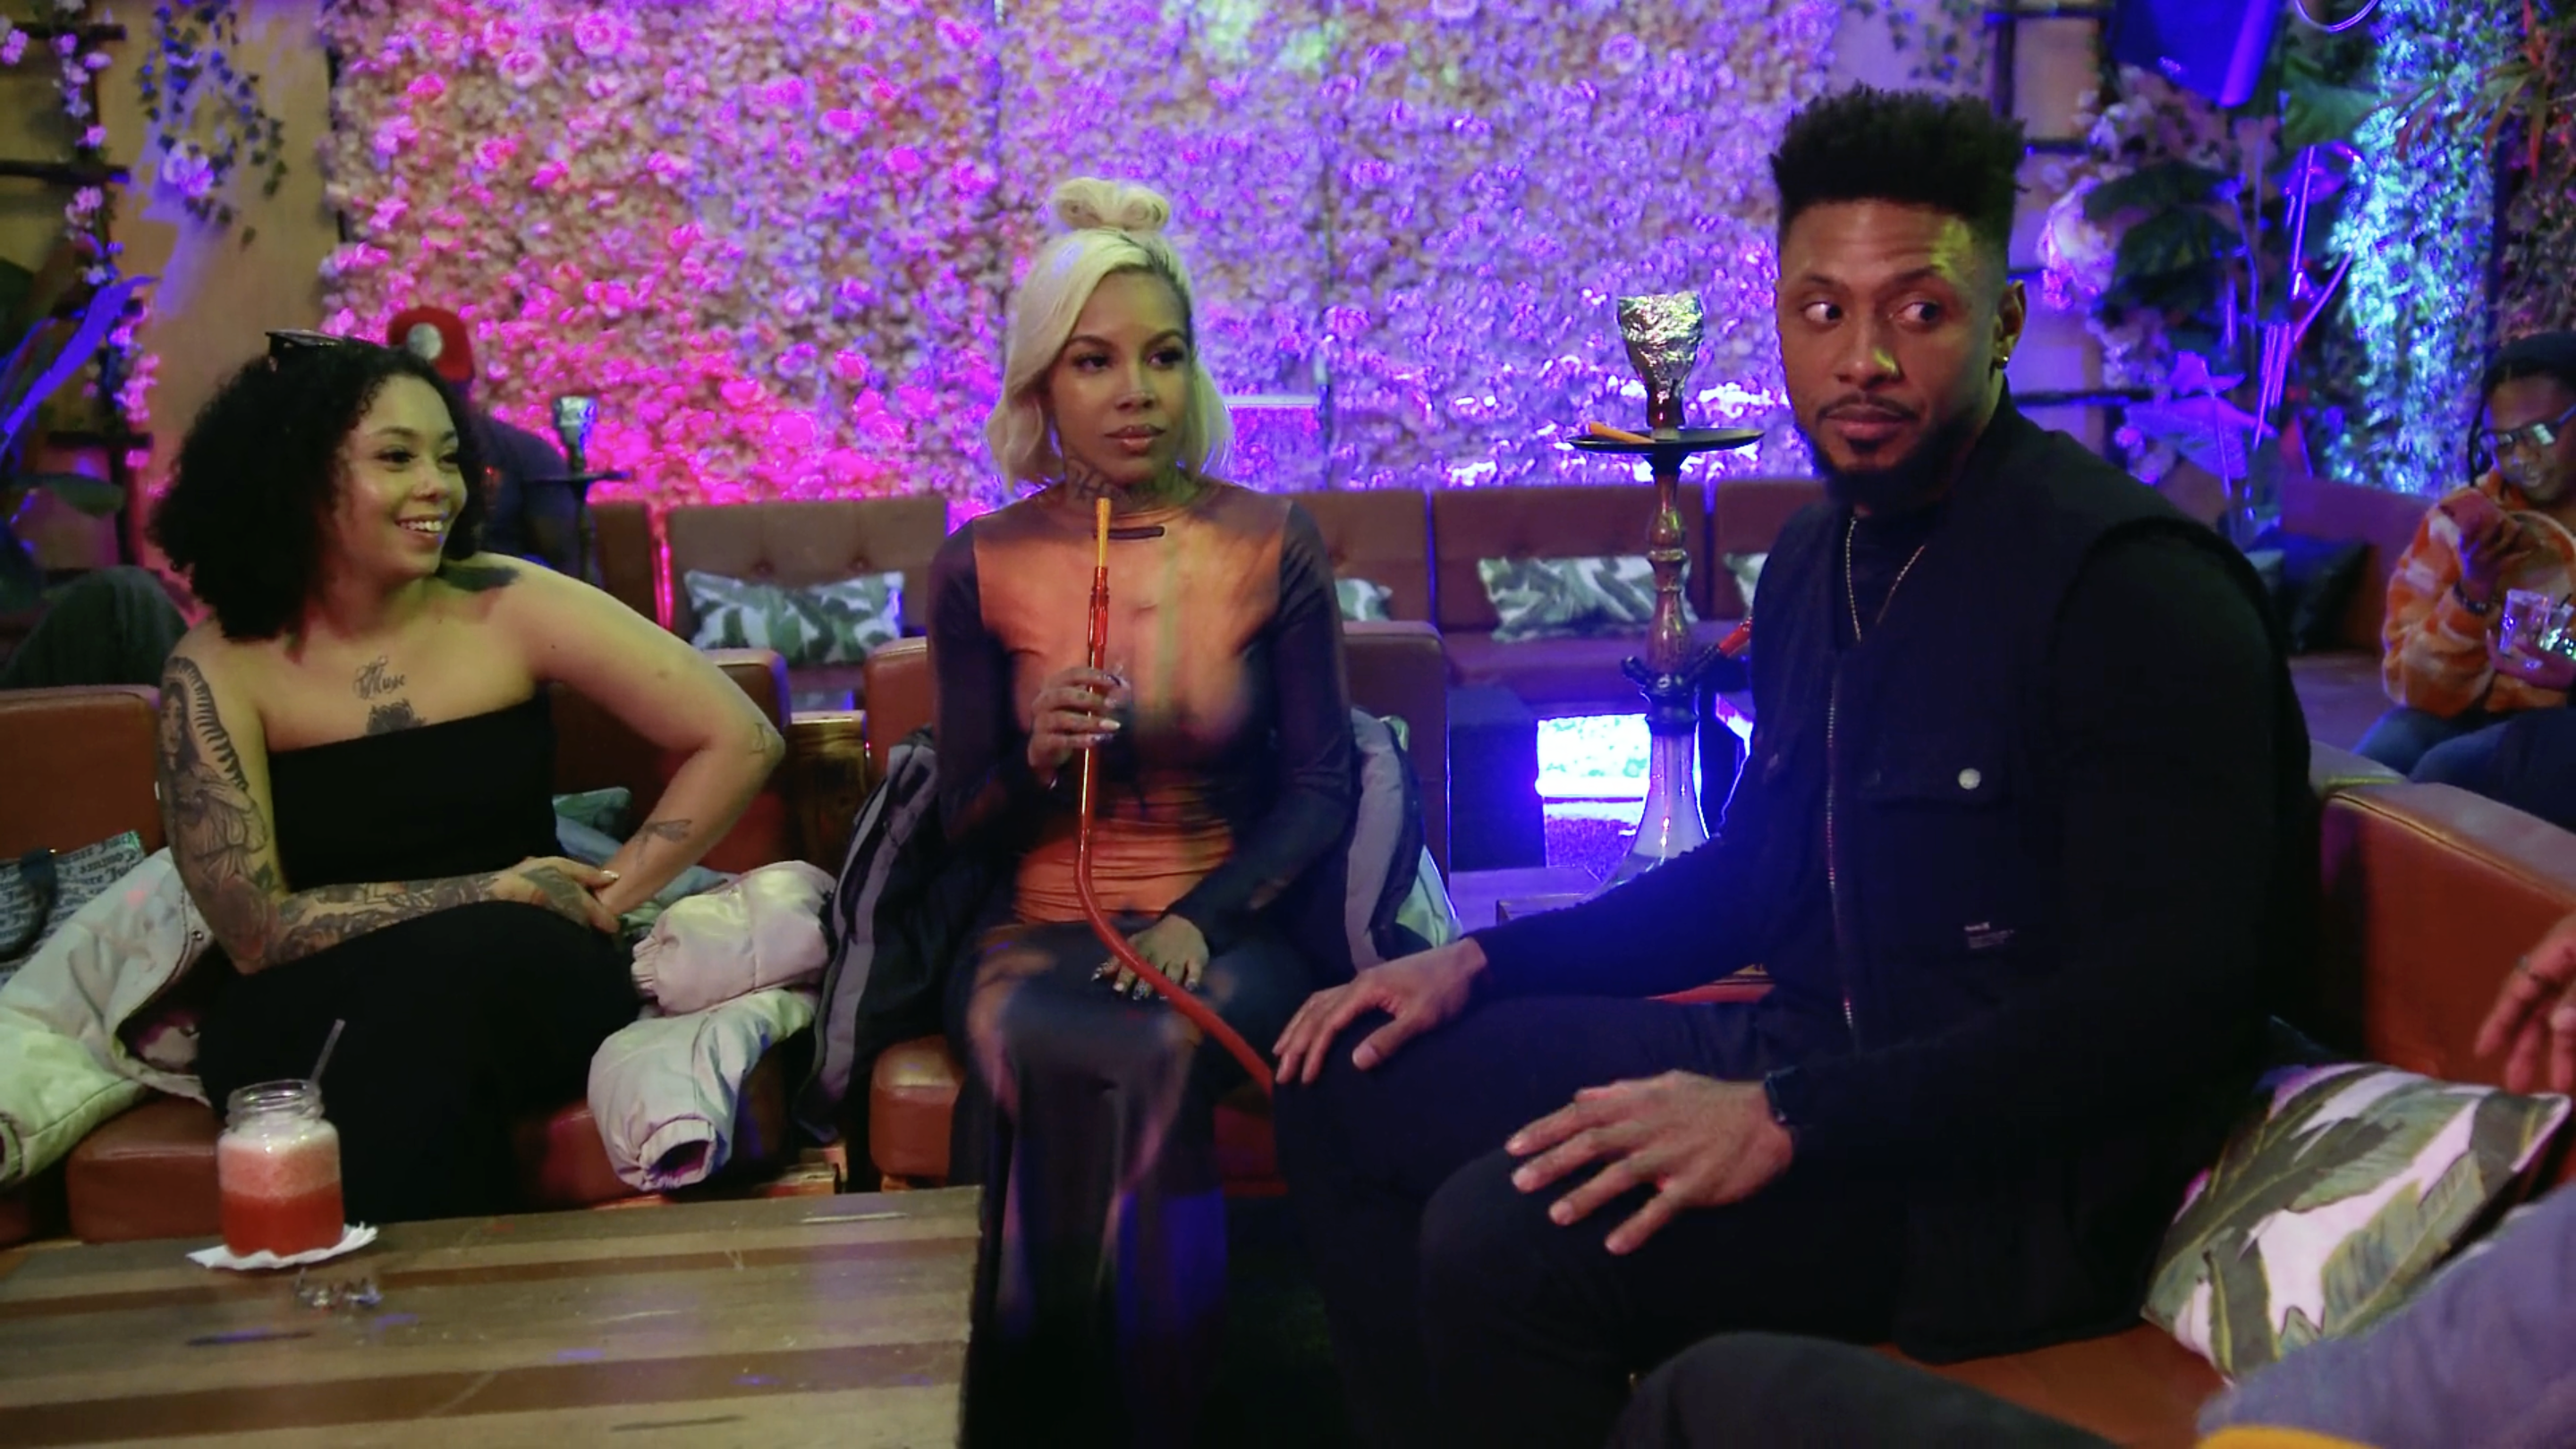 How to watch and stream Black Ink Crew: Los Angeles - 2019-2023 on Roku